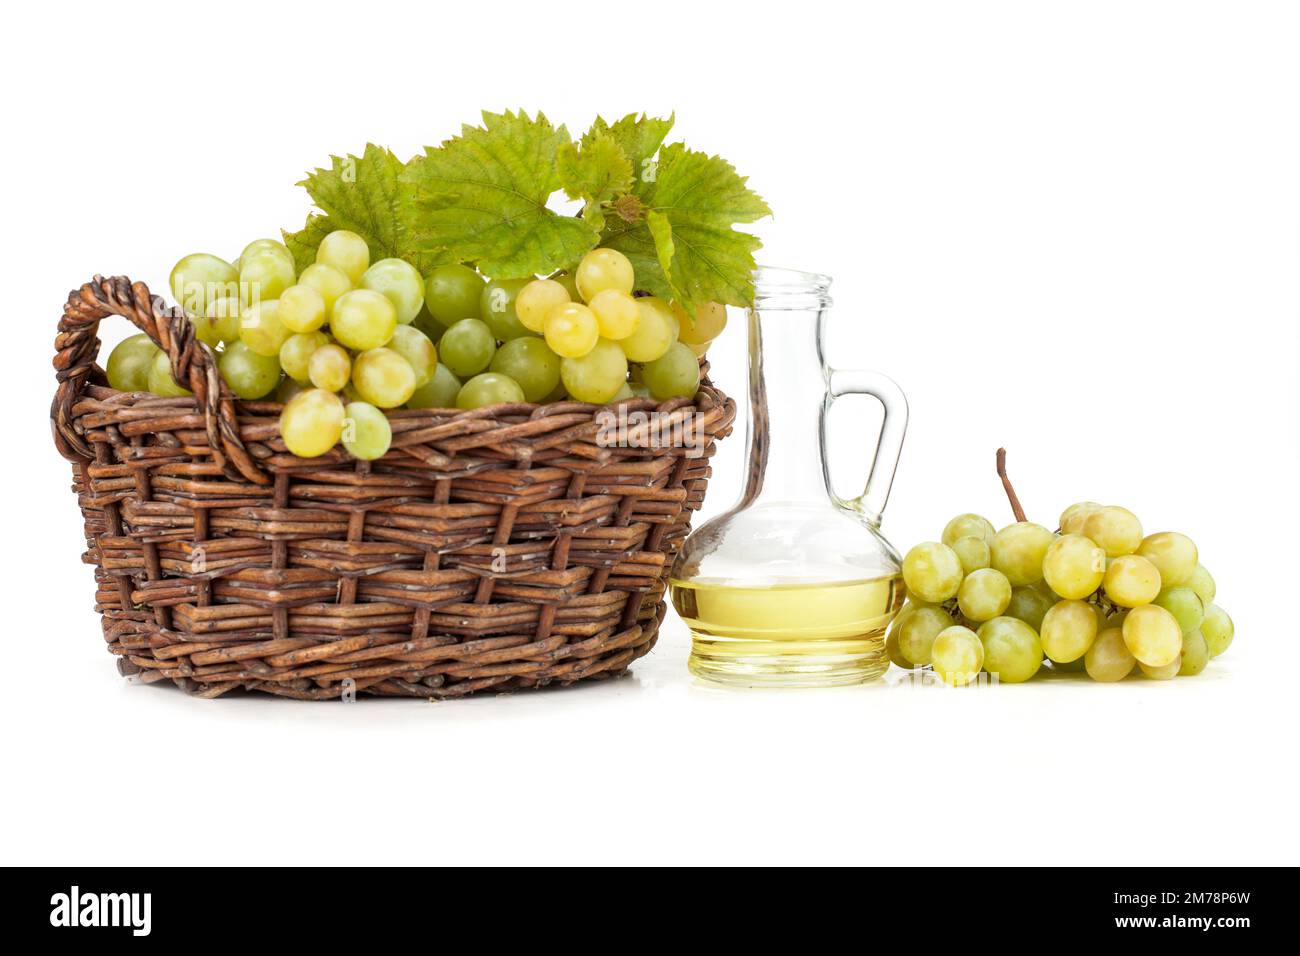 Grape seed oil on white background. The image also shows light grapes and dark grapes arranged on a white background Stock Photo